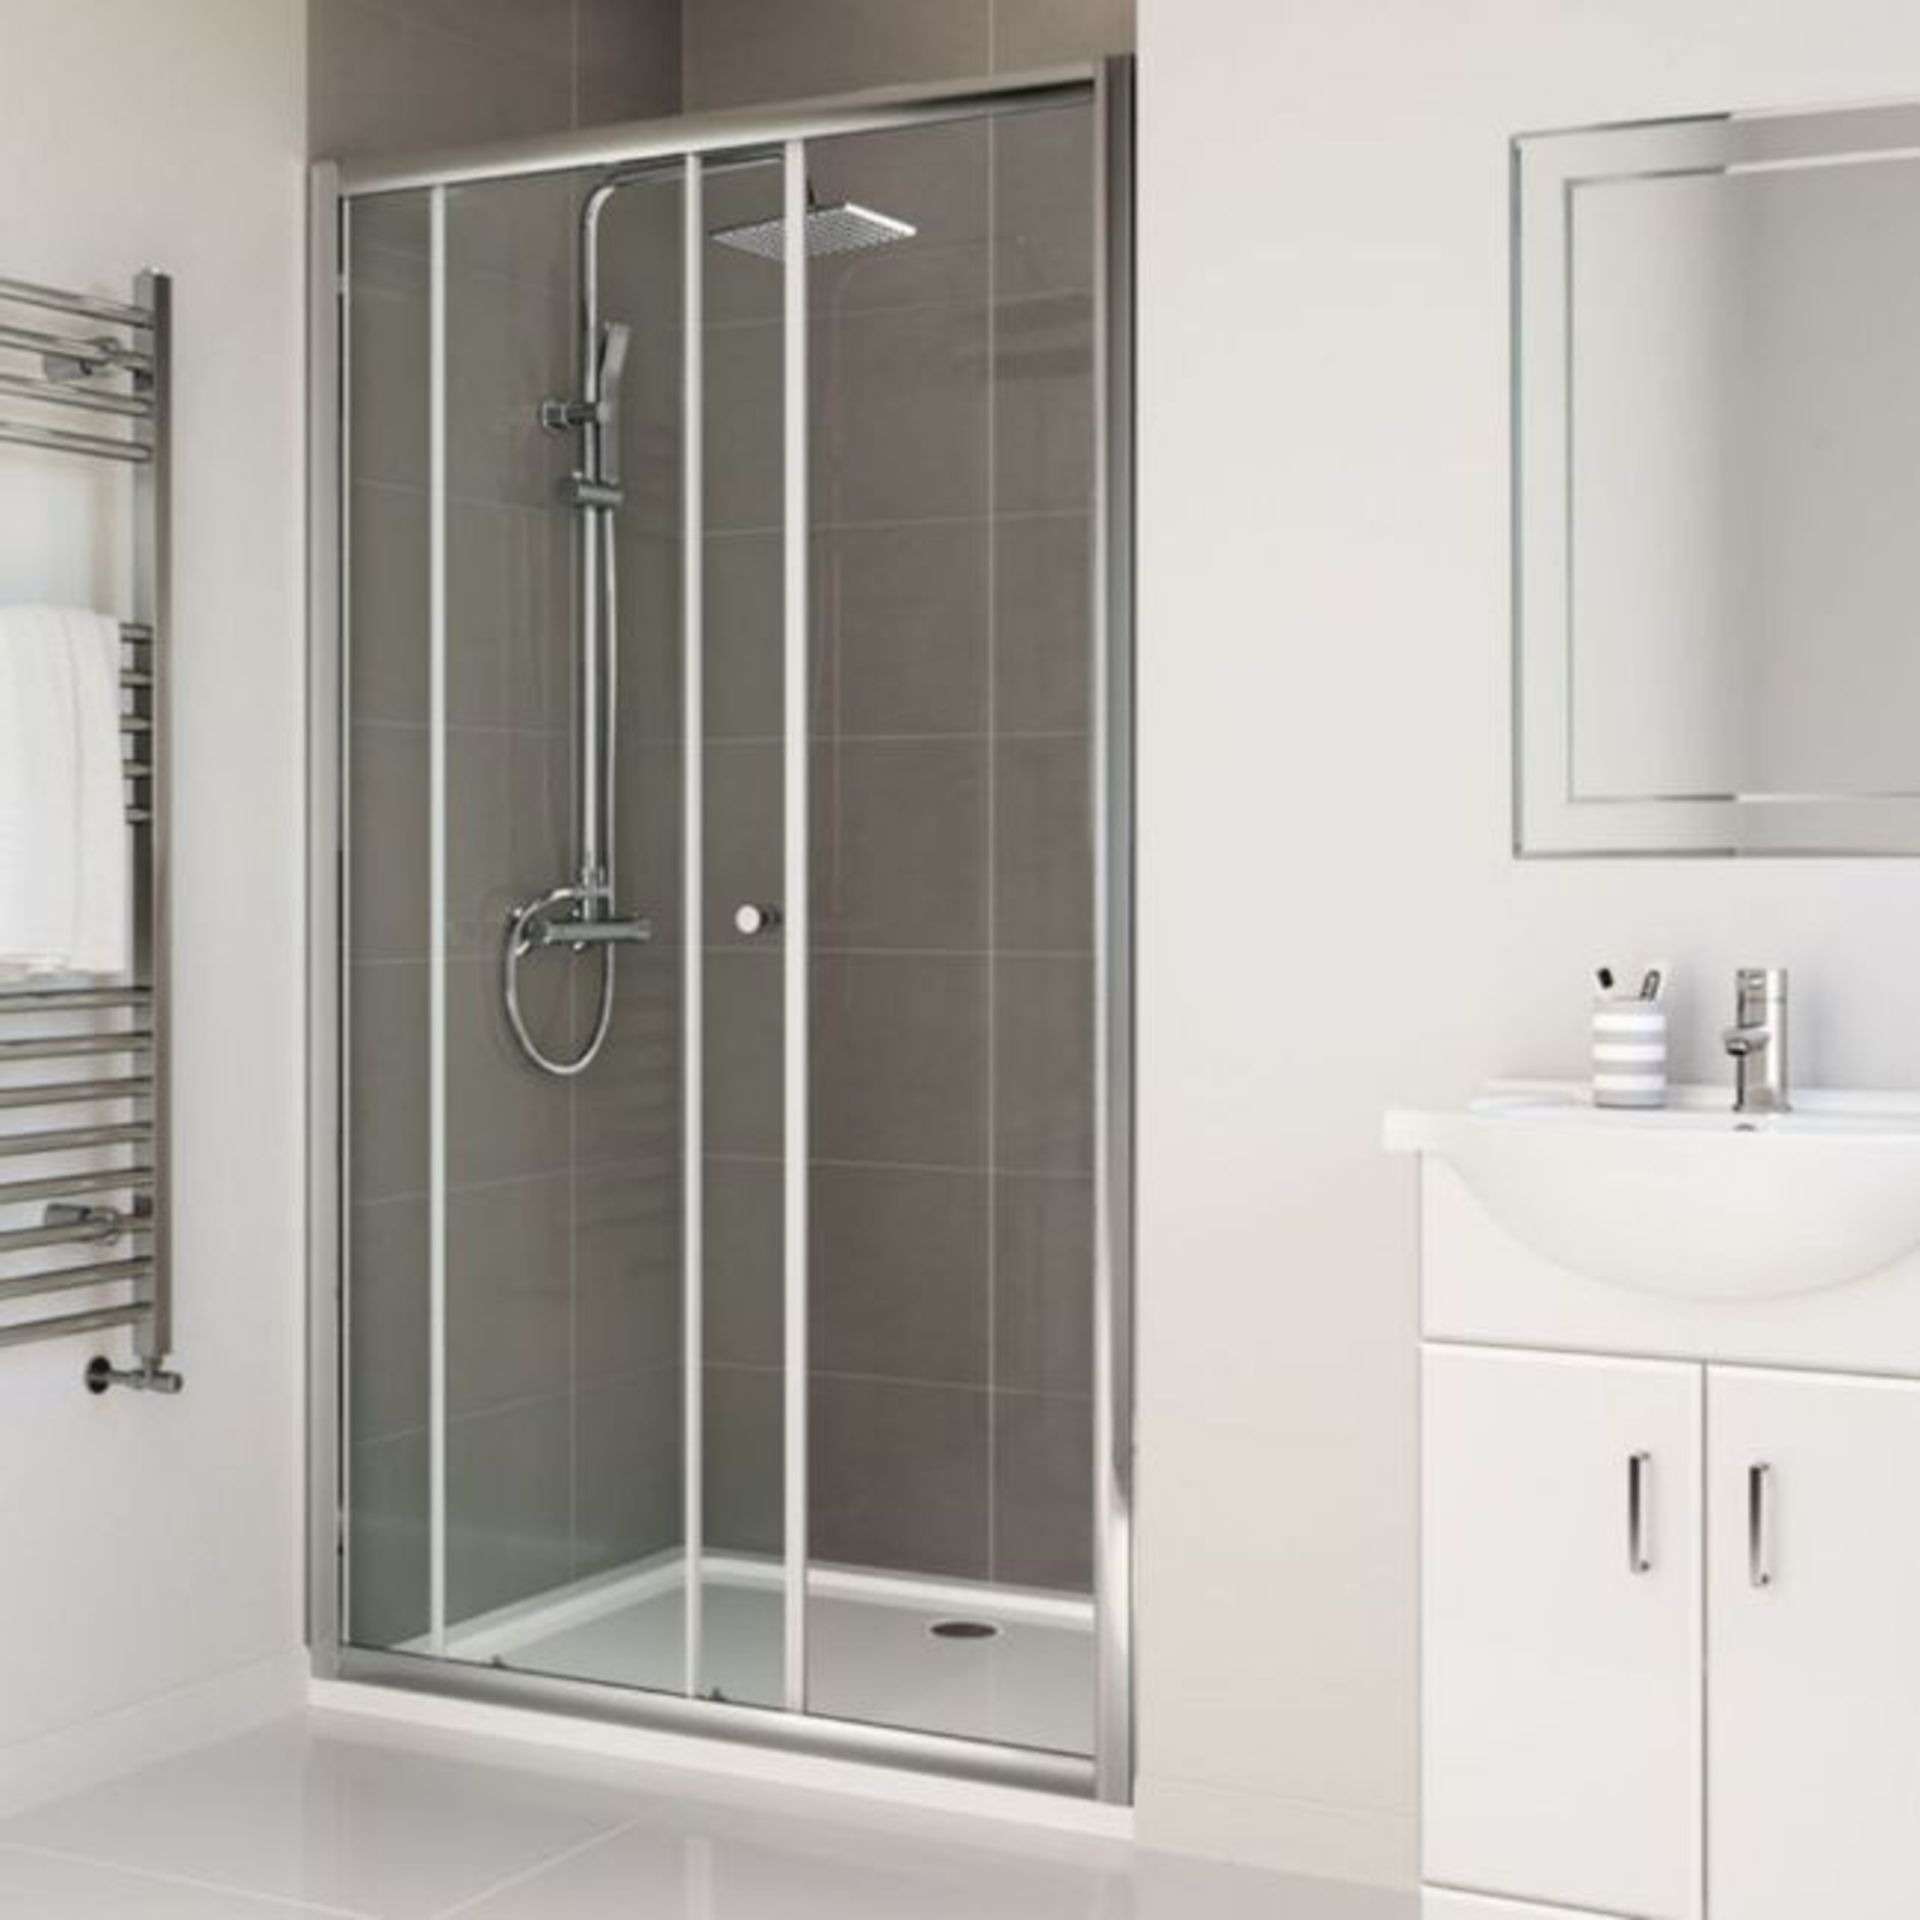 New Twyford's 1700mm - Elements Sliding Shower Door. RRP £399.99.4mm Safety Glass Fully Waterp... - Image 2 of 2